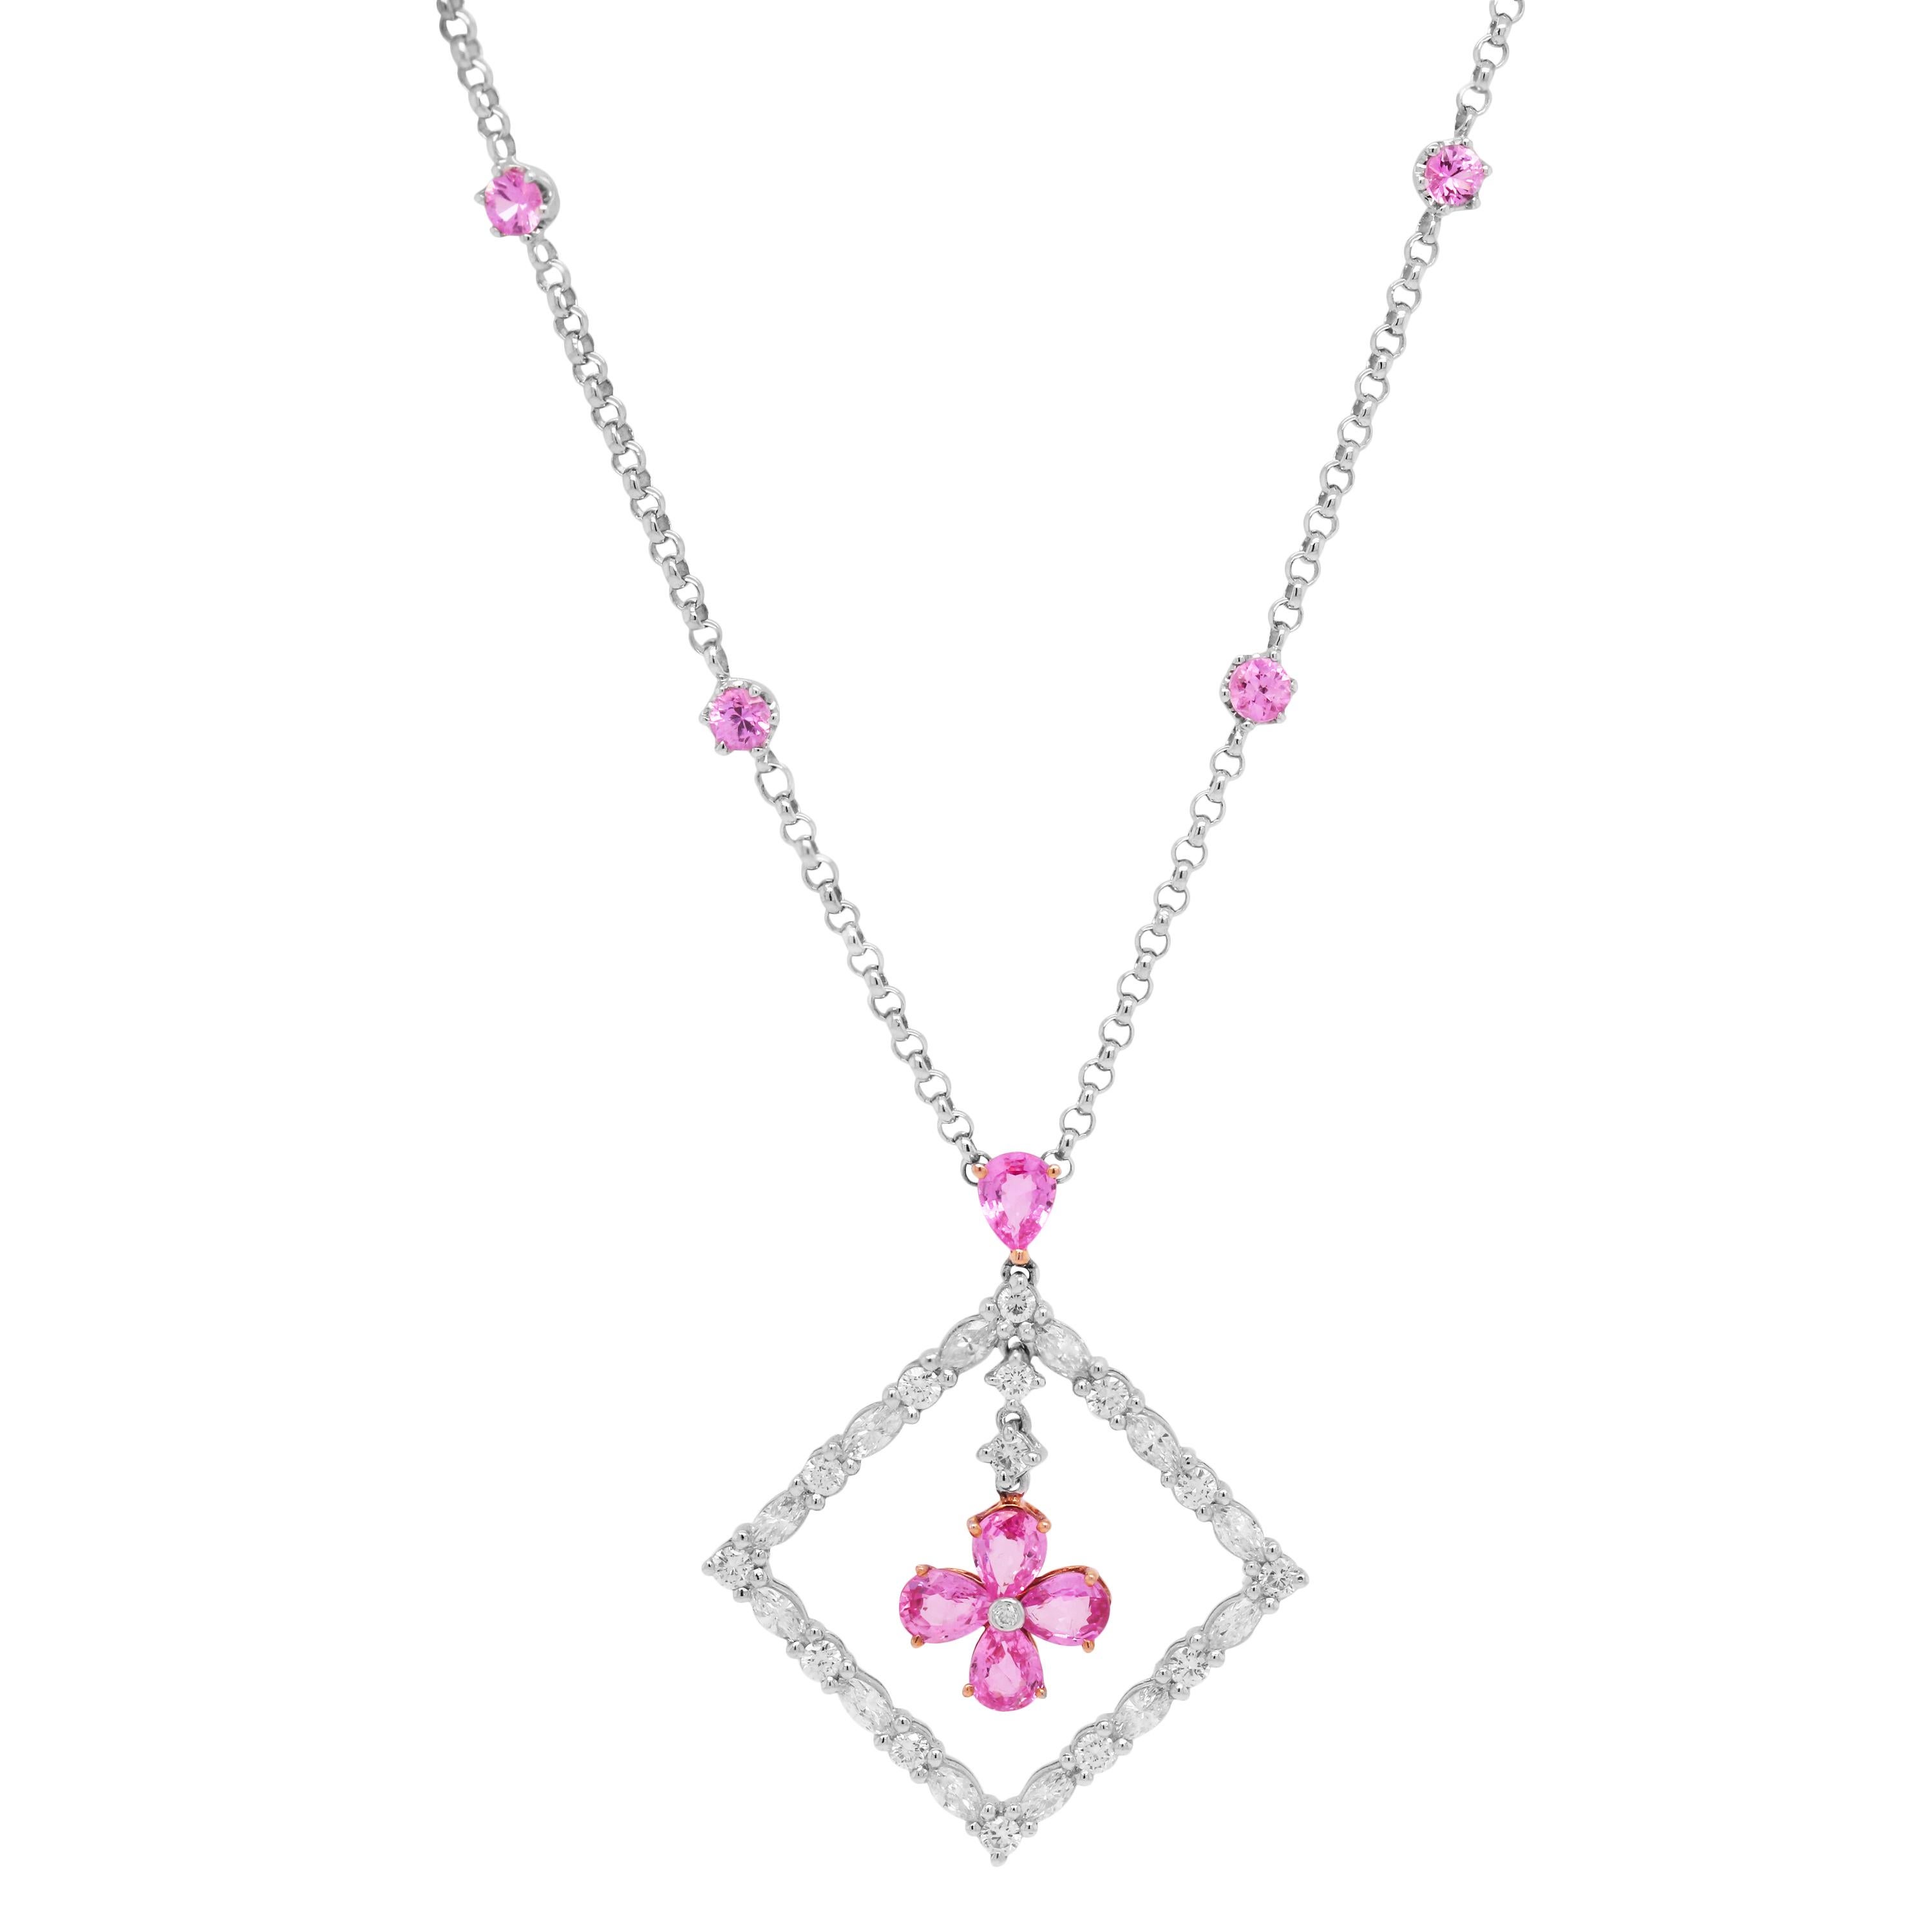 Pear Cut White Gold and Diamond Square Pendant Necklace with Pink Sapphires For Sale